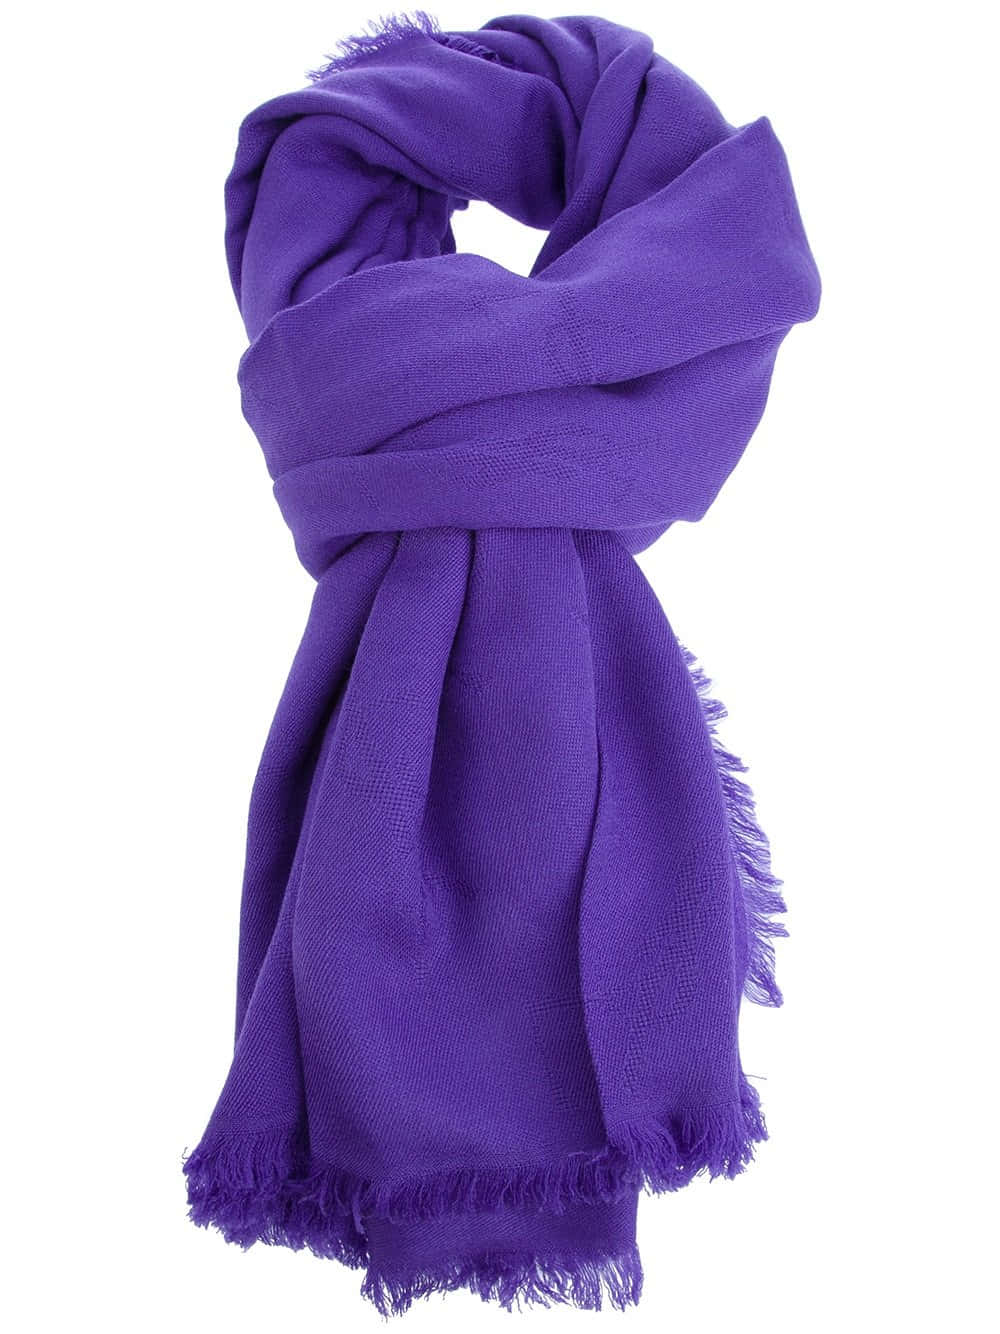 “Add a Stylish Touch of Color with a Purple Scarf” Wallpaper